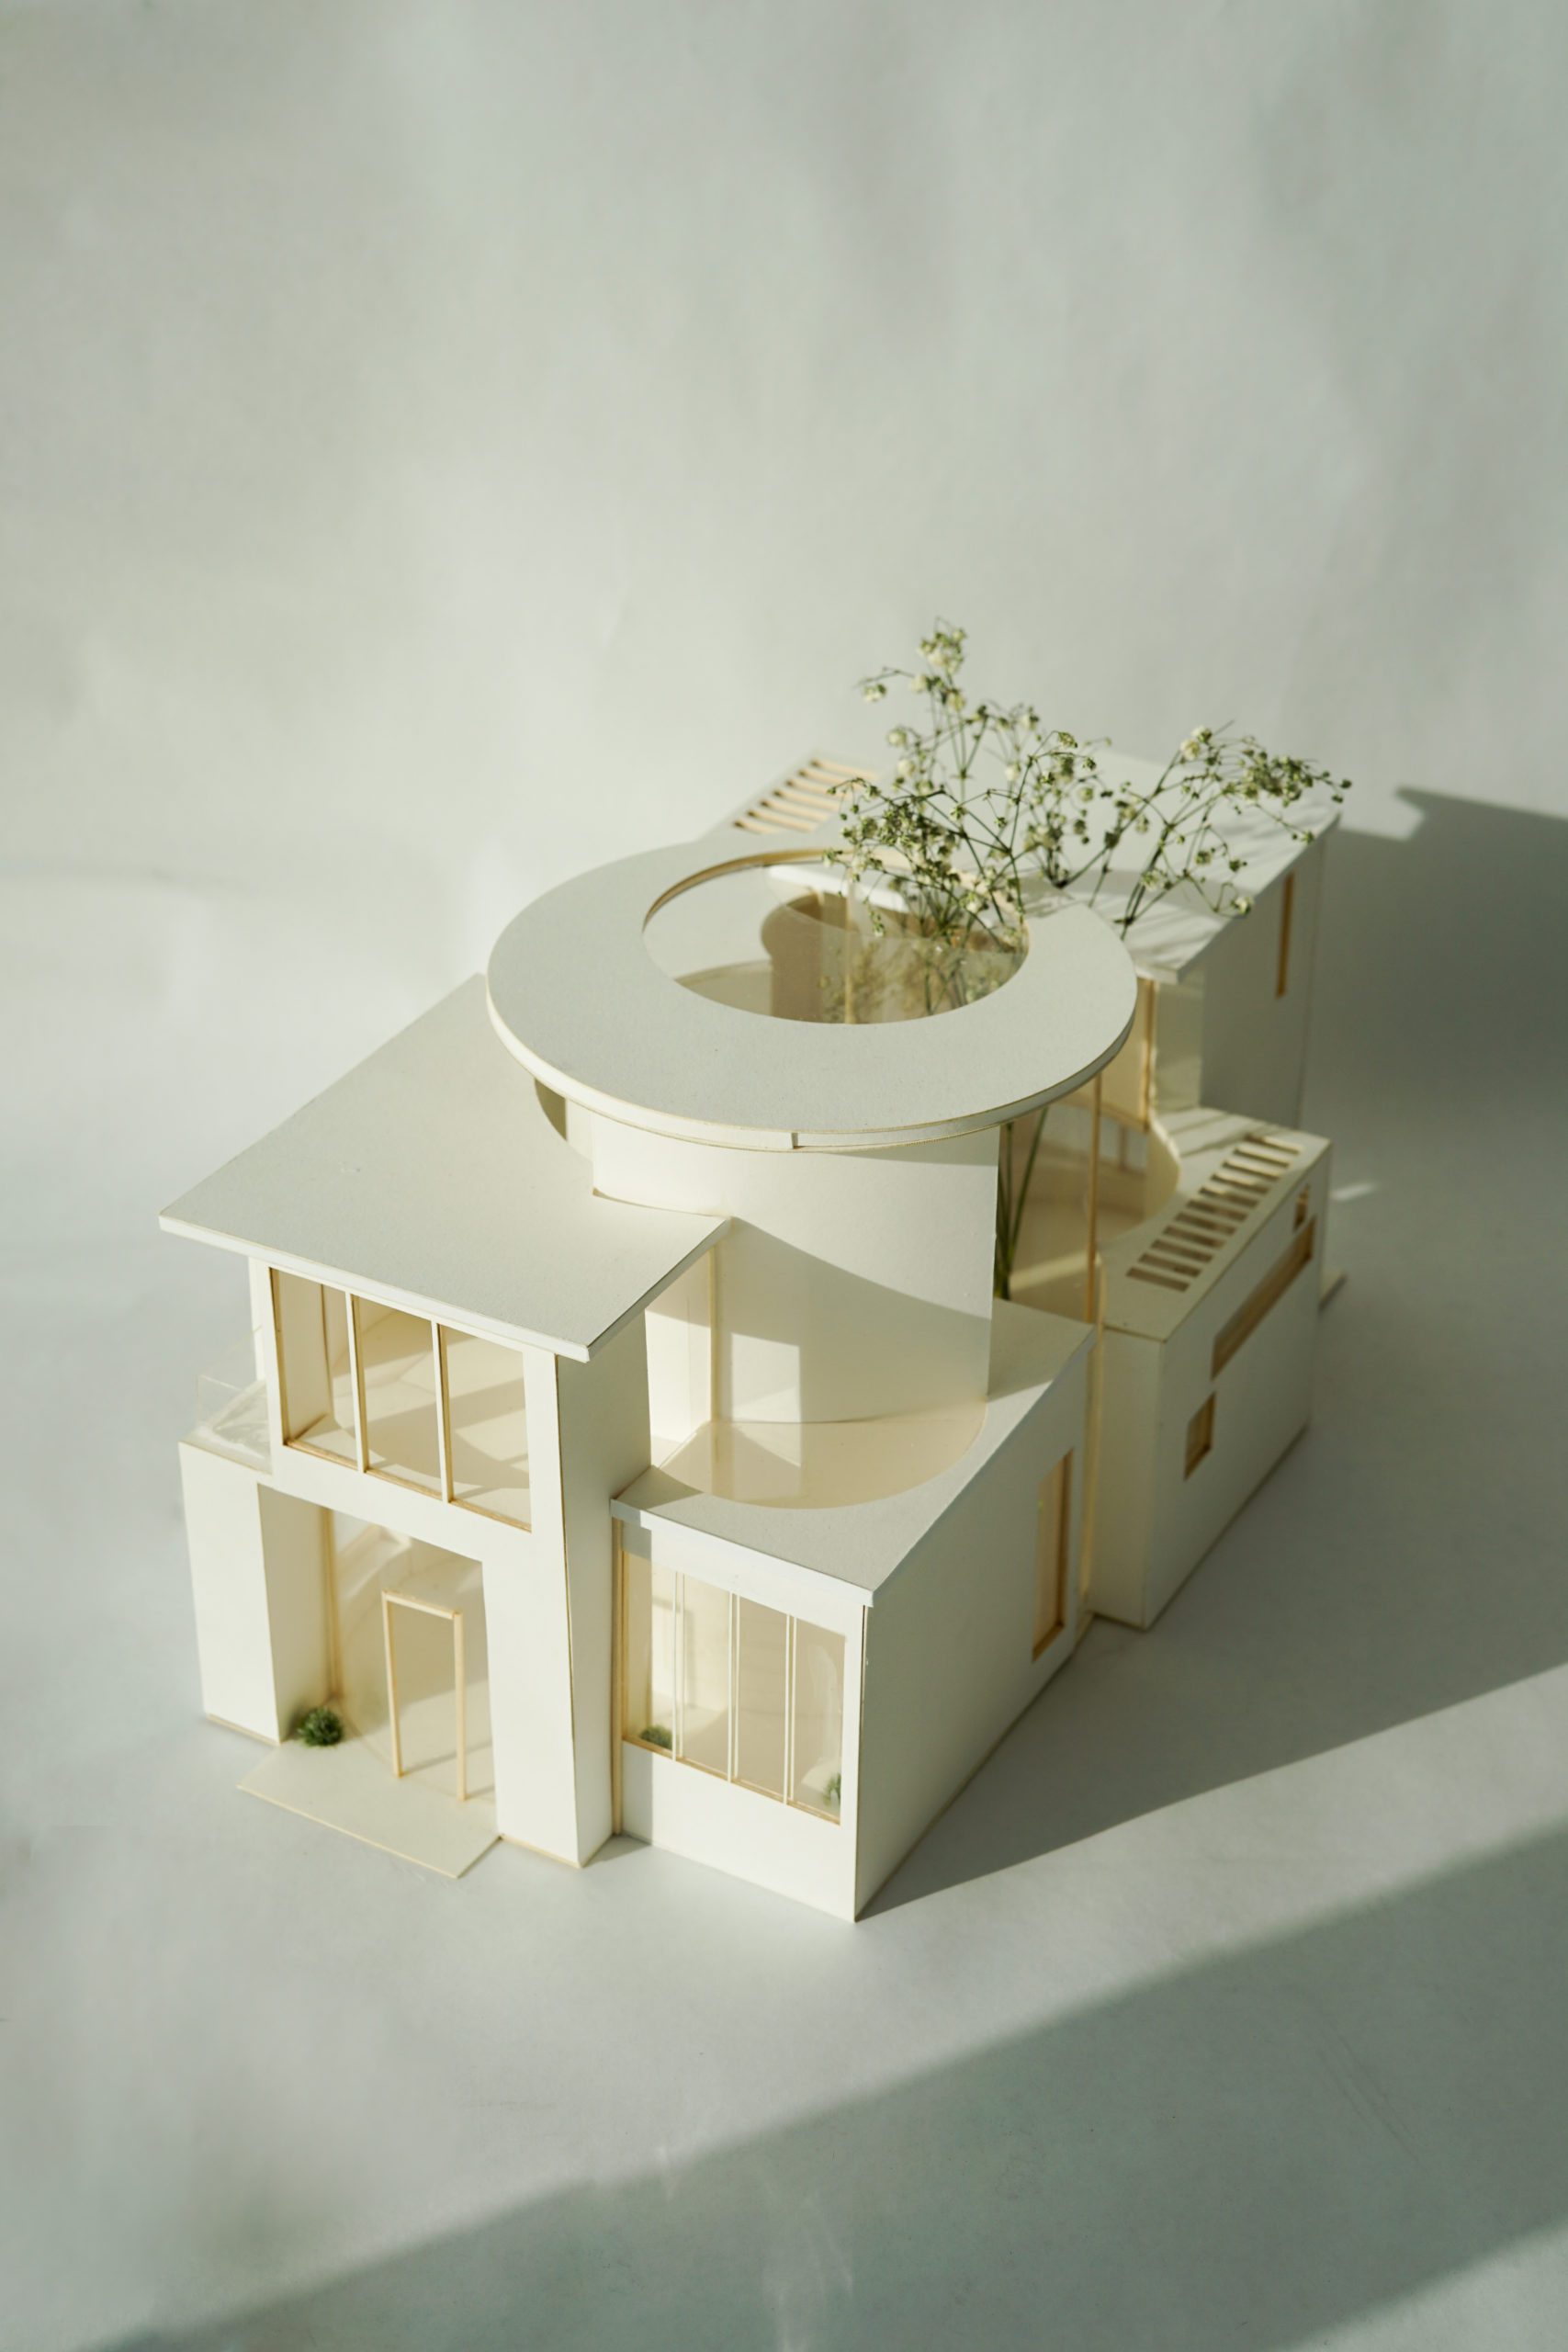 Exterior photo of architecture model with shadows